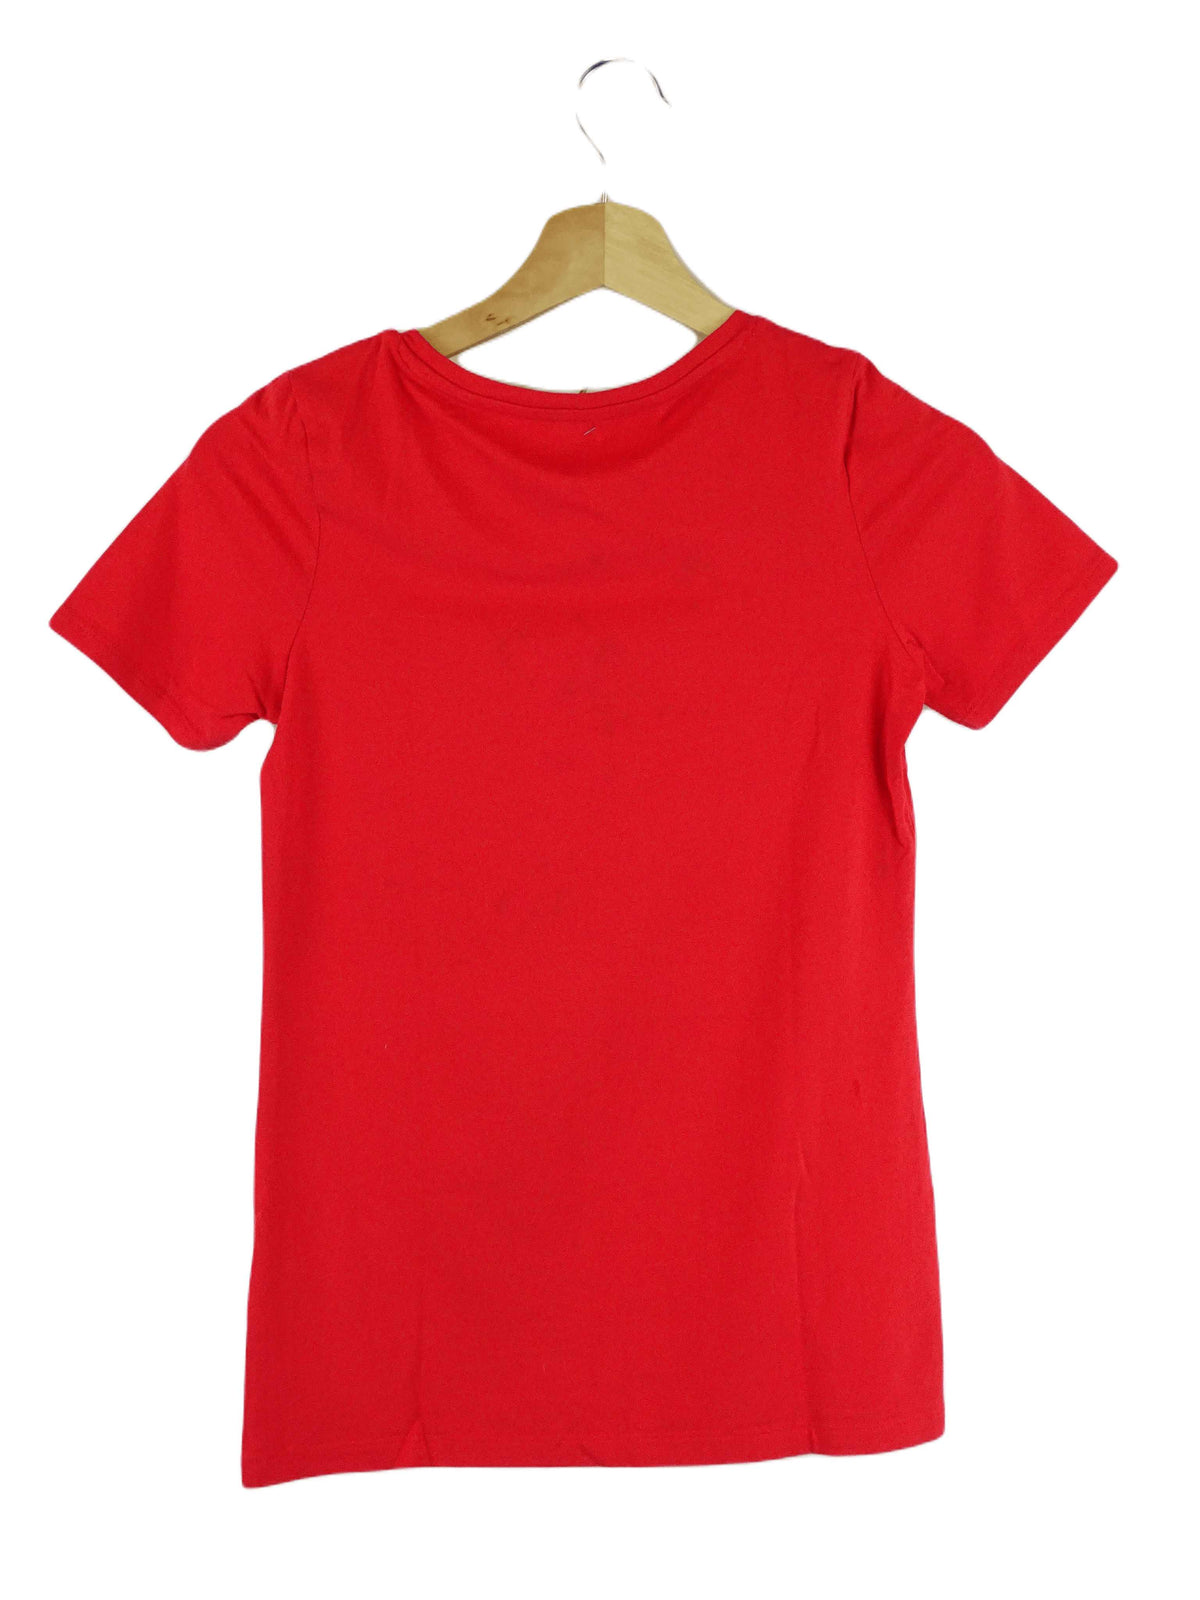 Giordano Red T-shirt S